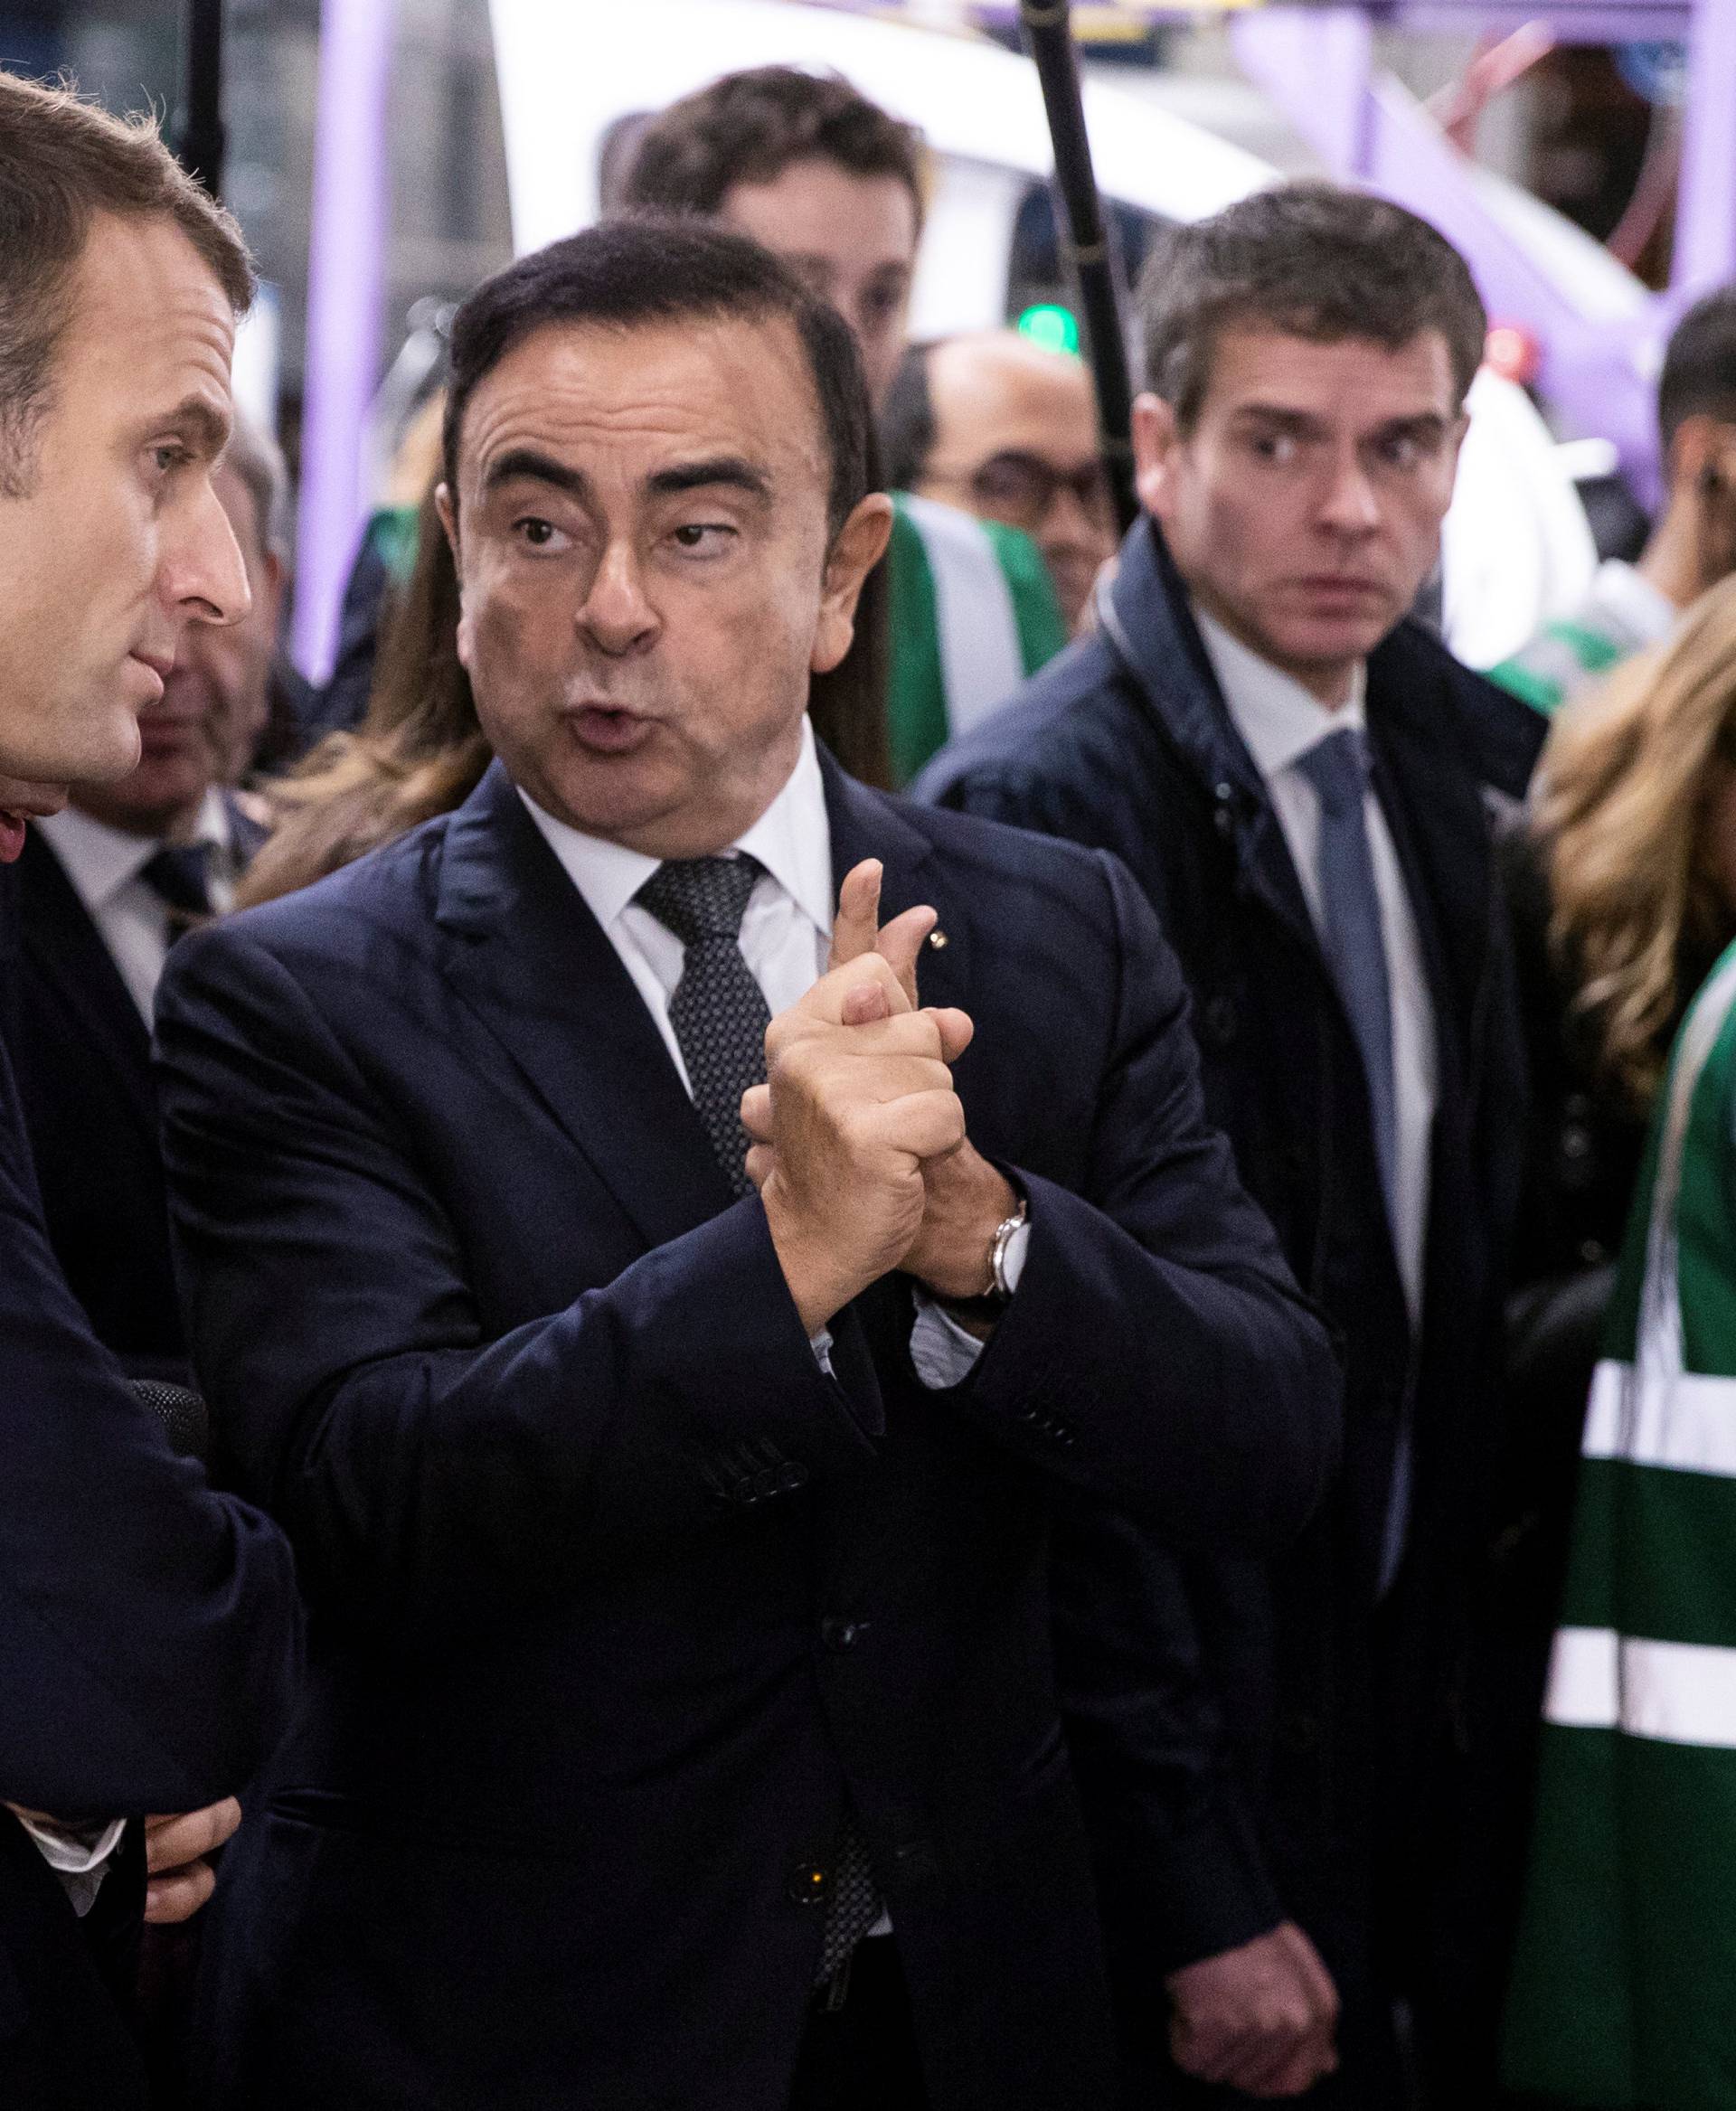 French President Emmanuel Macron discusses with Renault CEO Carlos Ghosn during a visit in the Renault factory in Maubeuge